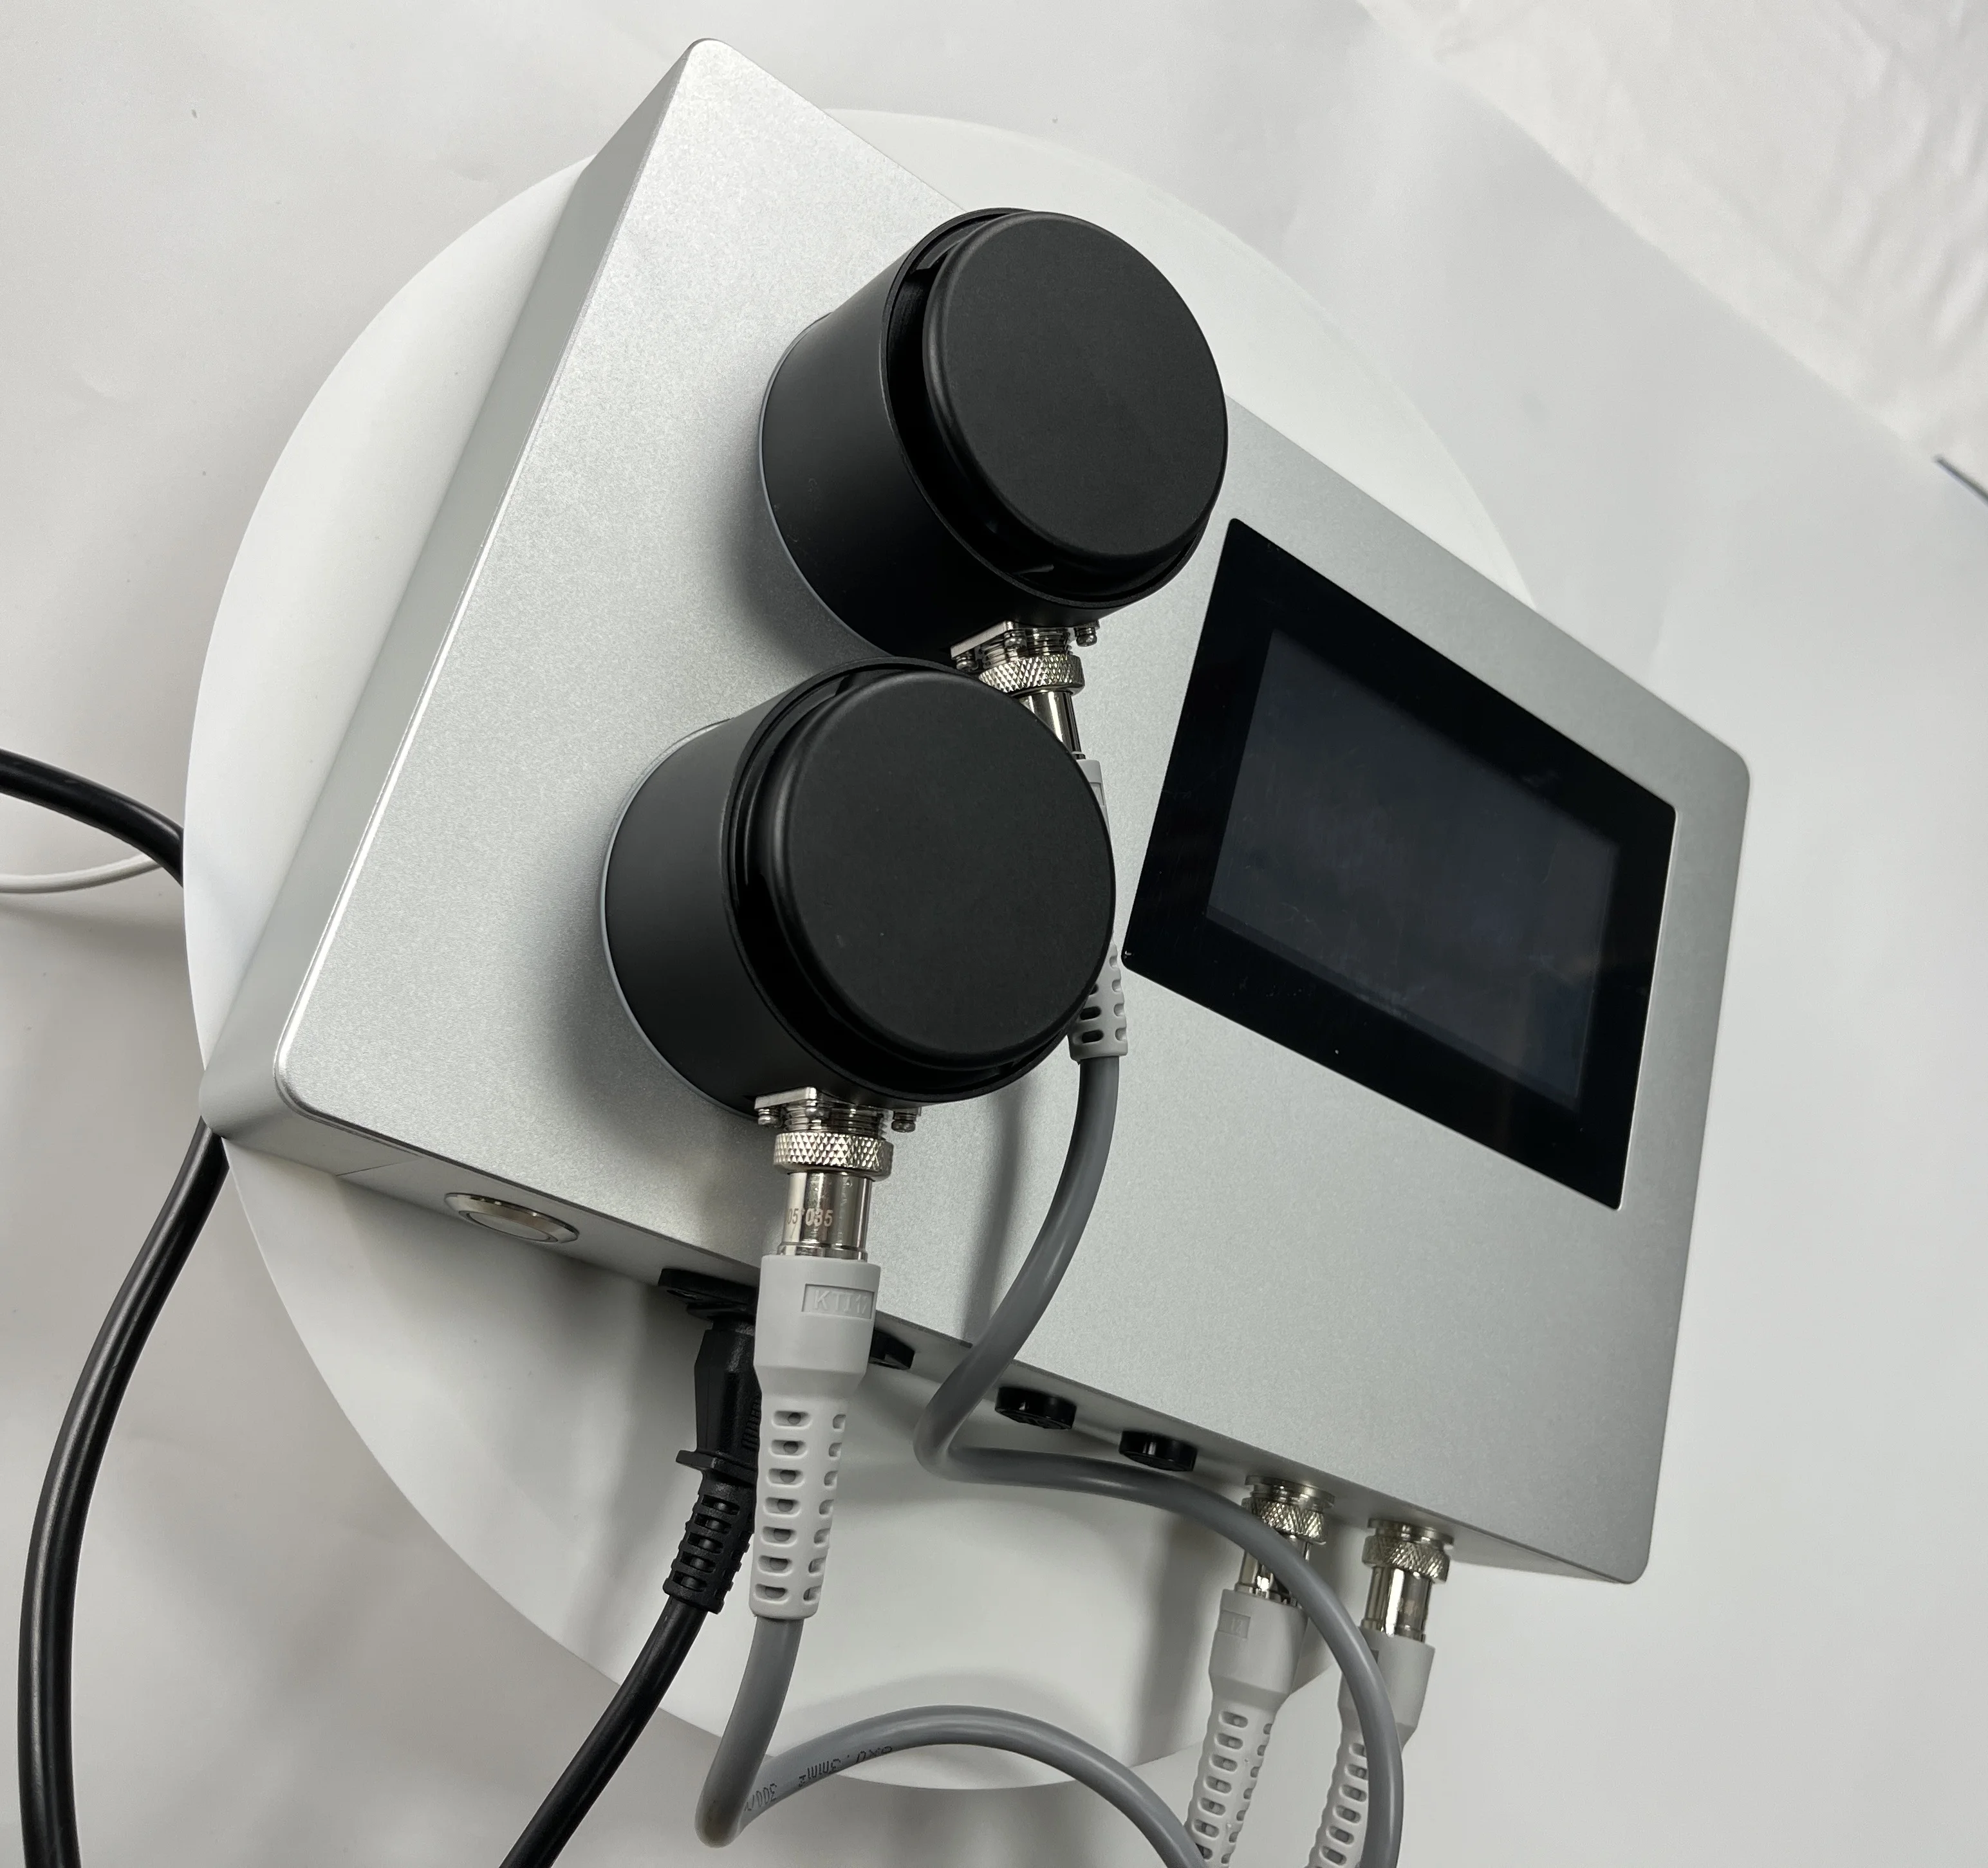 

Effective Diabetes/cancer/tumor/prostate Treatment Millimeter Wave Therapy Machine